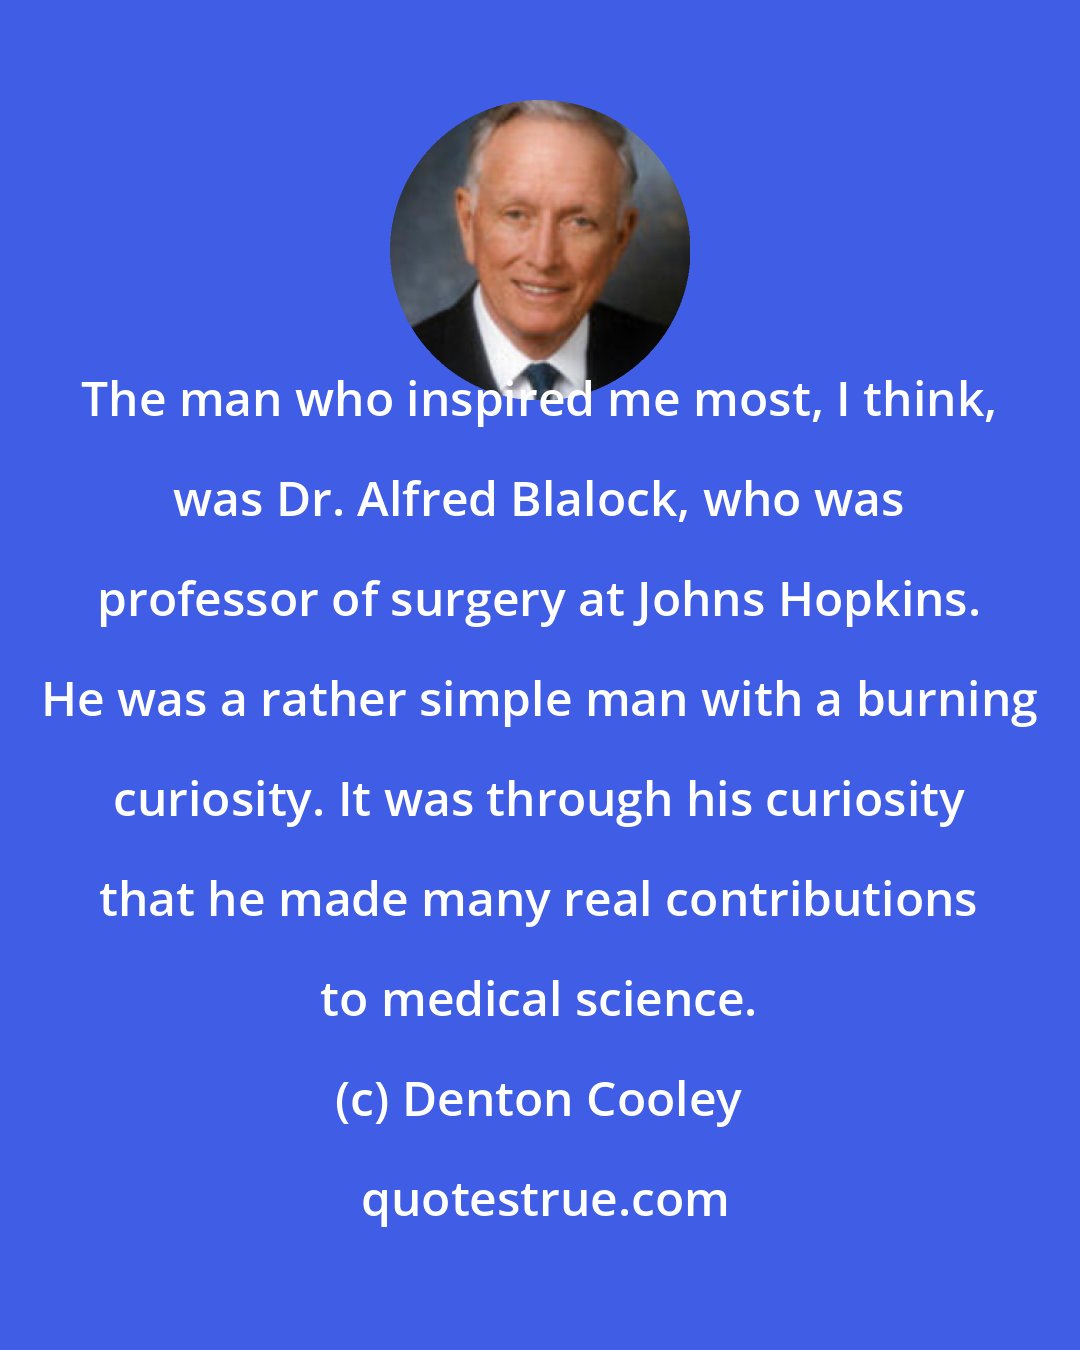 Denton Cooley: The man who inspired me most, I think, was Dr. Alfred Blalock, who was professor of surgery at Johns Hopkins. He was a rather simple man with a burning curiosity. It was through his curiosity that he made many real contributions to medical science.